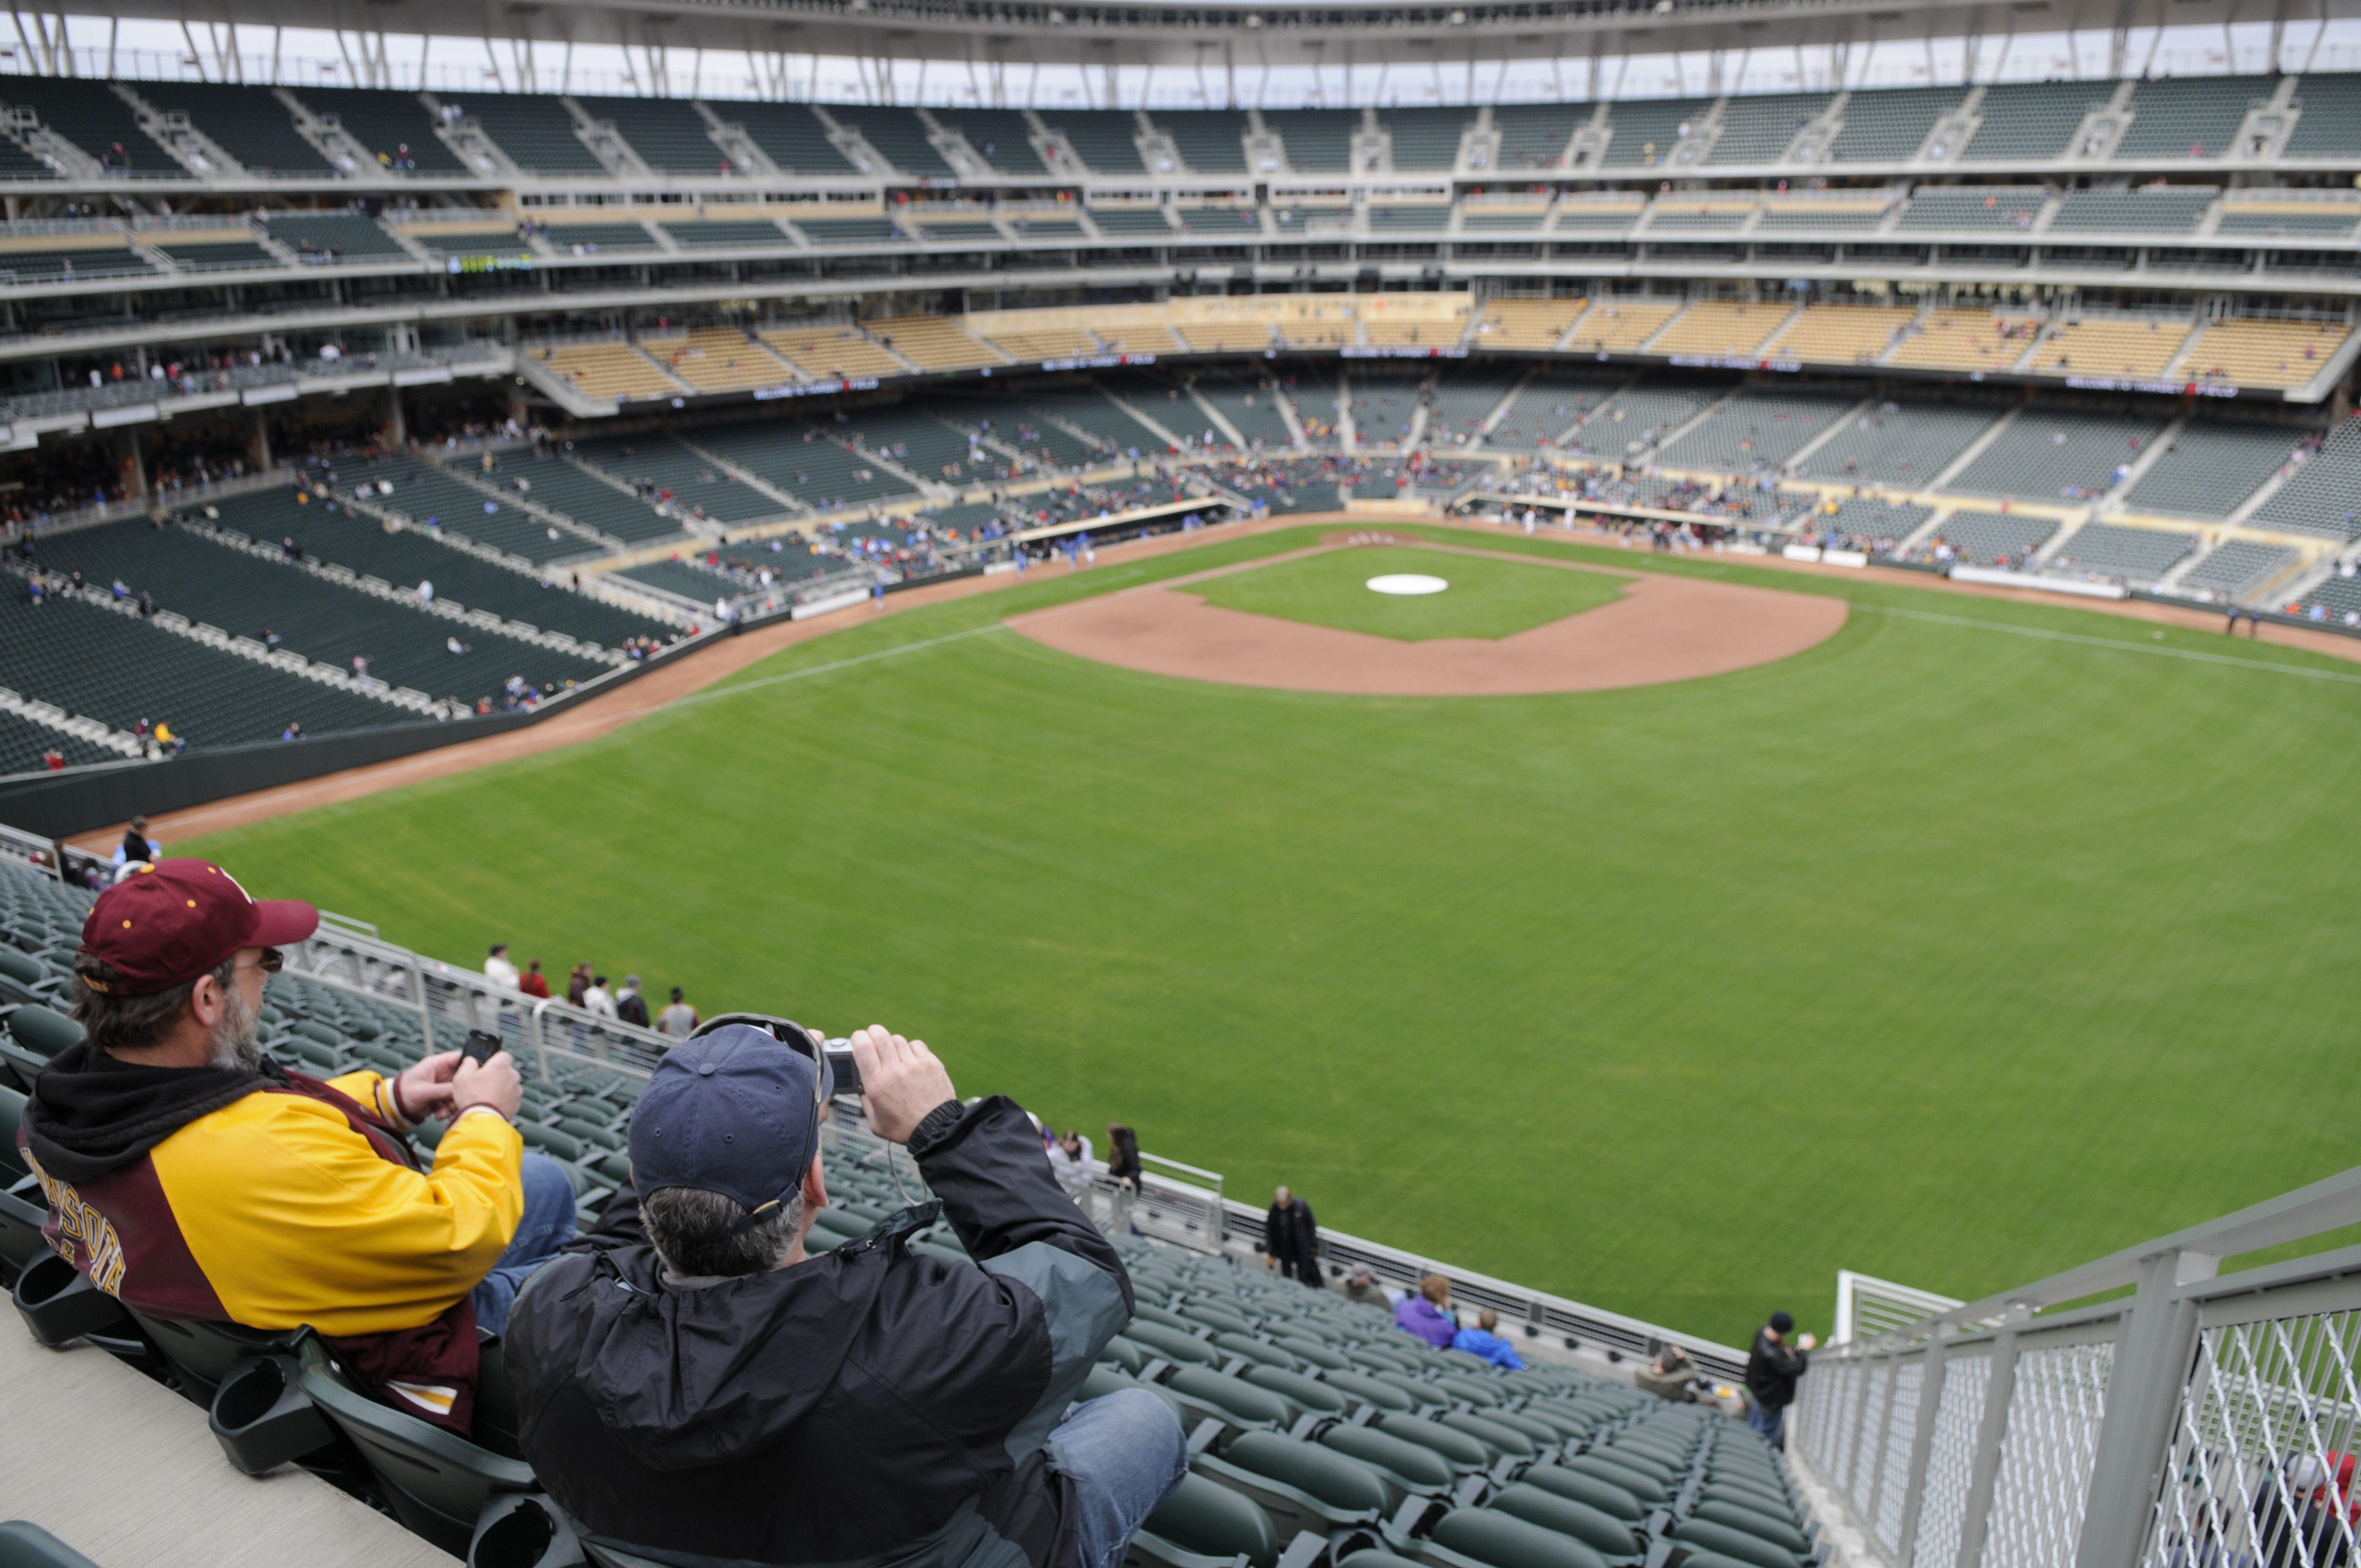 MINNEAPOLIS, MN - MARCH 27: Fans sit in the grandstand seats above right field before an exhibition game between the Minnesota Golden Gophers and the Louisiana Tech Bulldogs at Target Field on March 27, 2010 in Minneapolis, Minnesota. (Photo by Hannah Fos